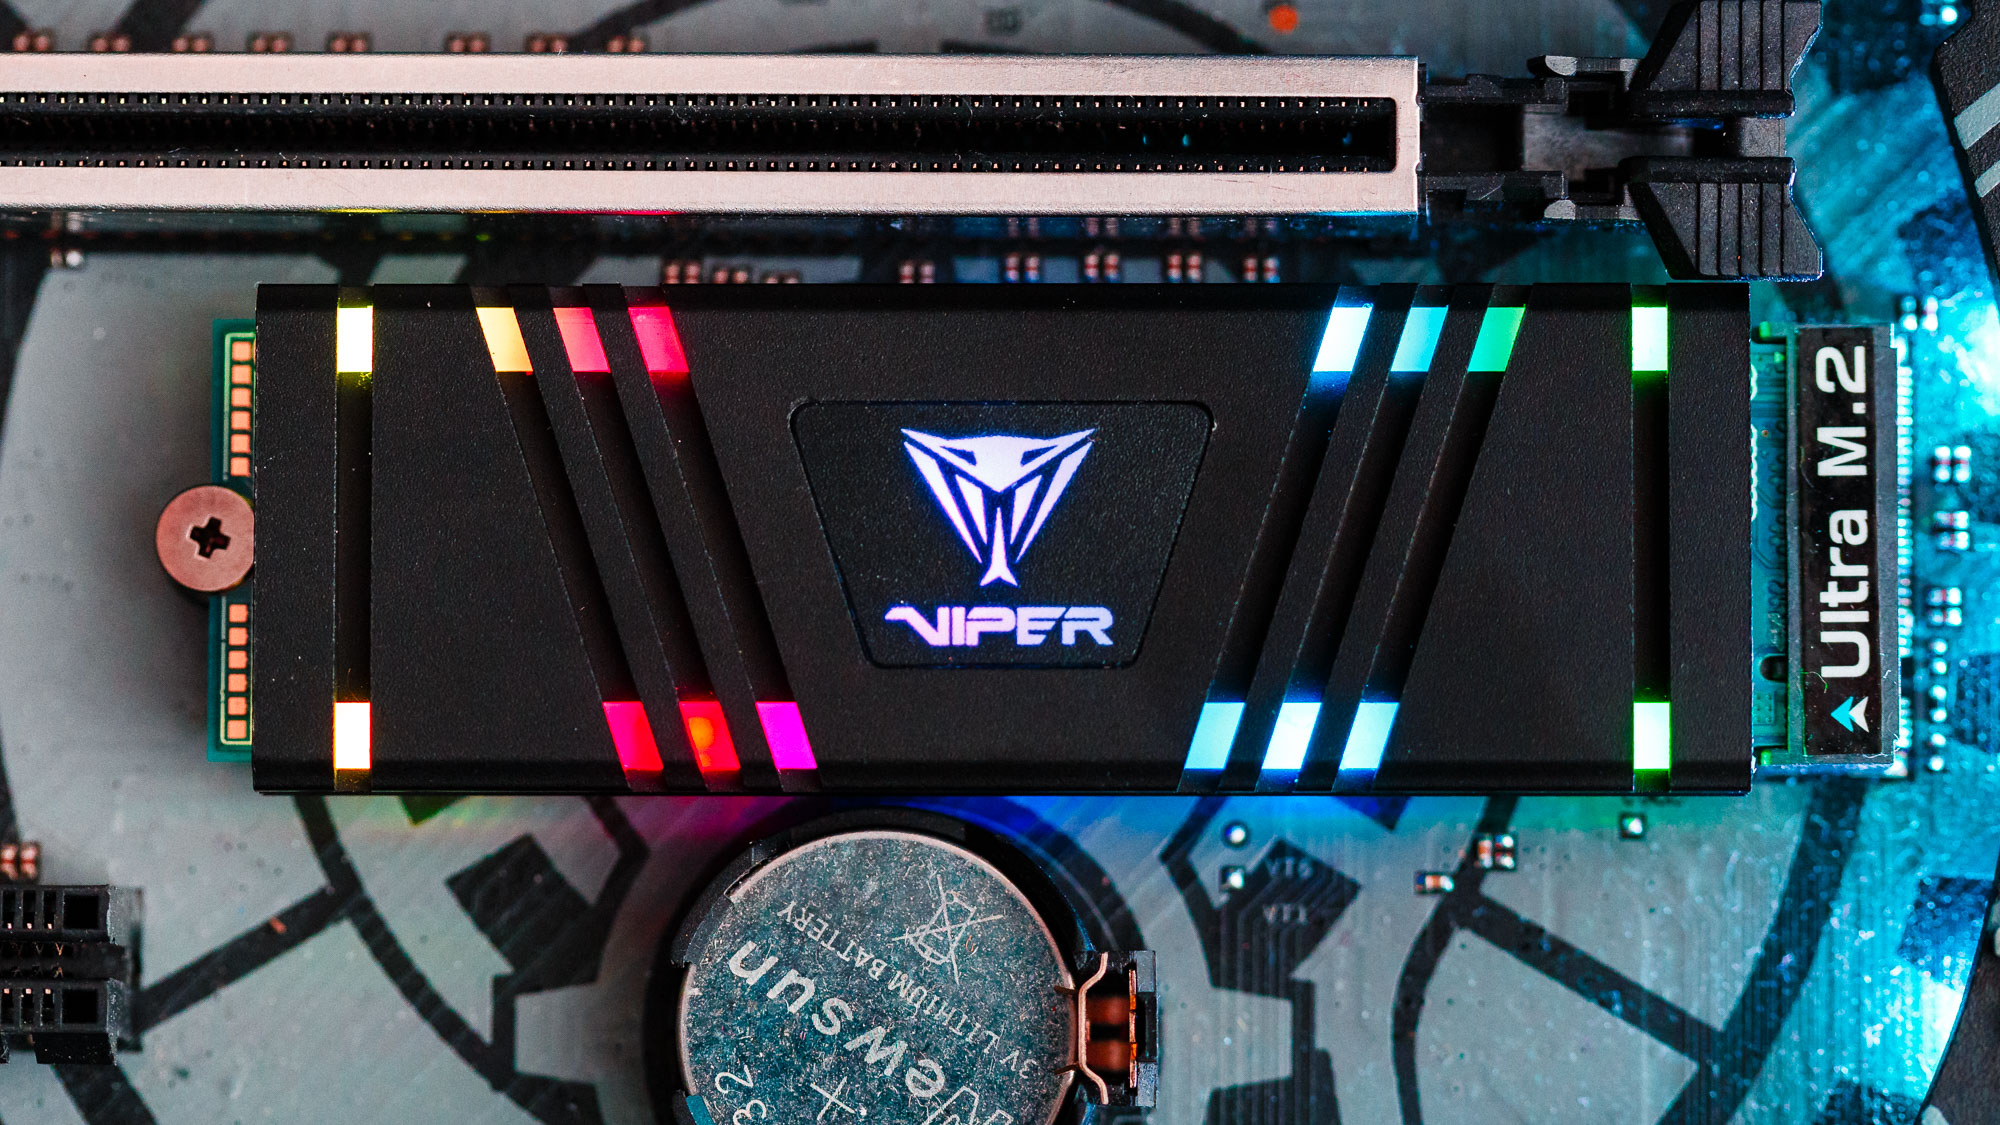 Patriot Viper VPR100 M.2 NVMe SSD Review: Killer Speed and RGB